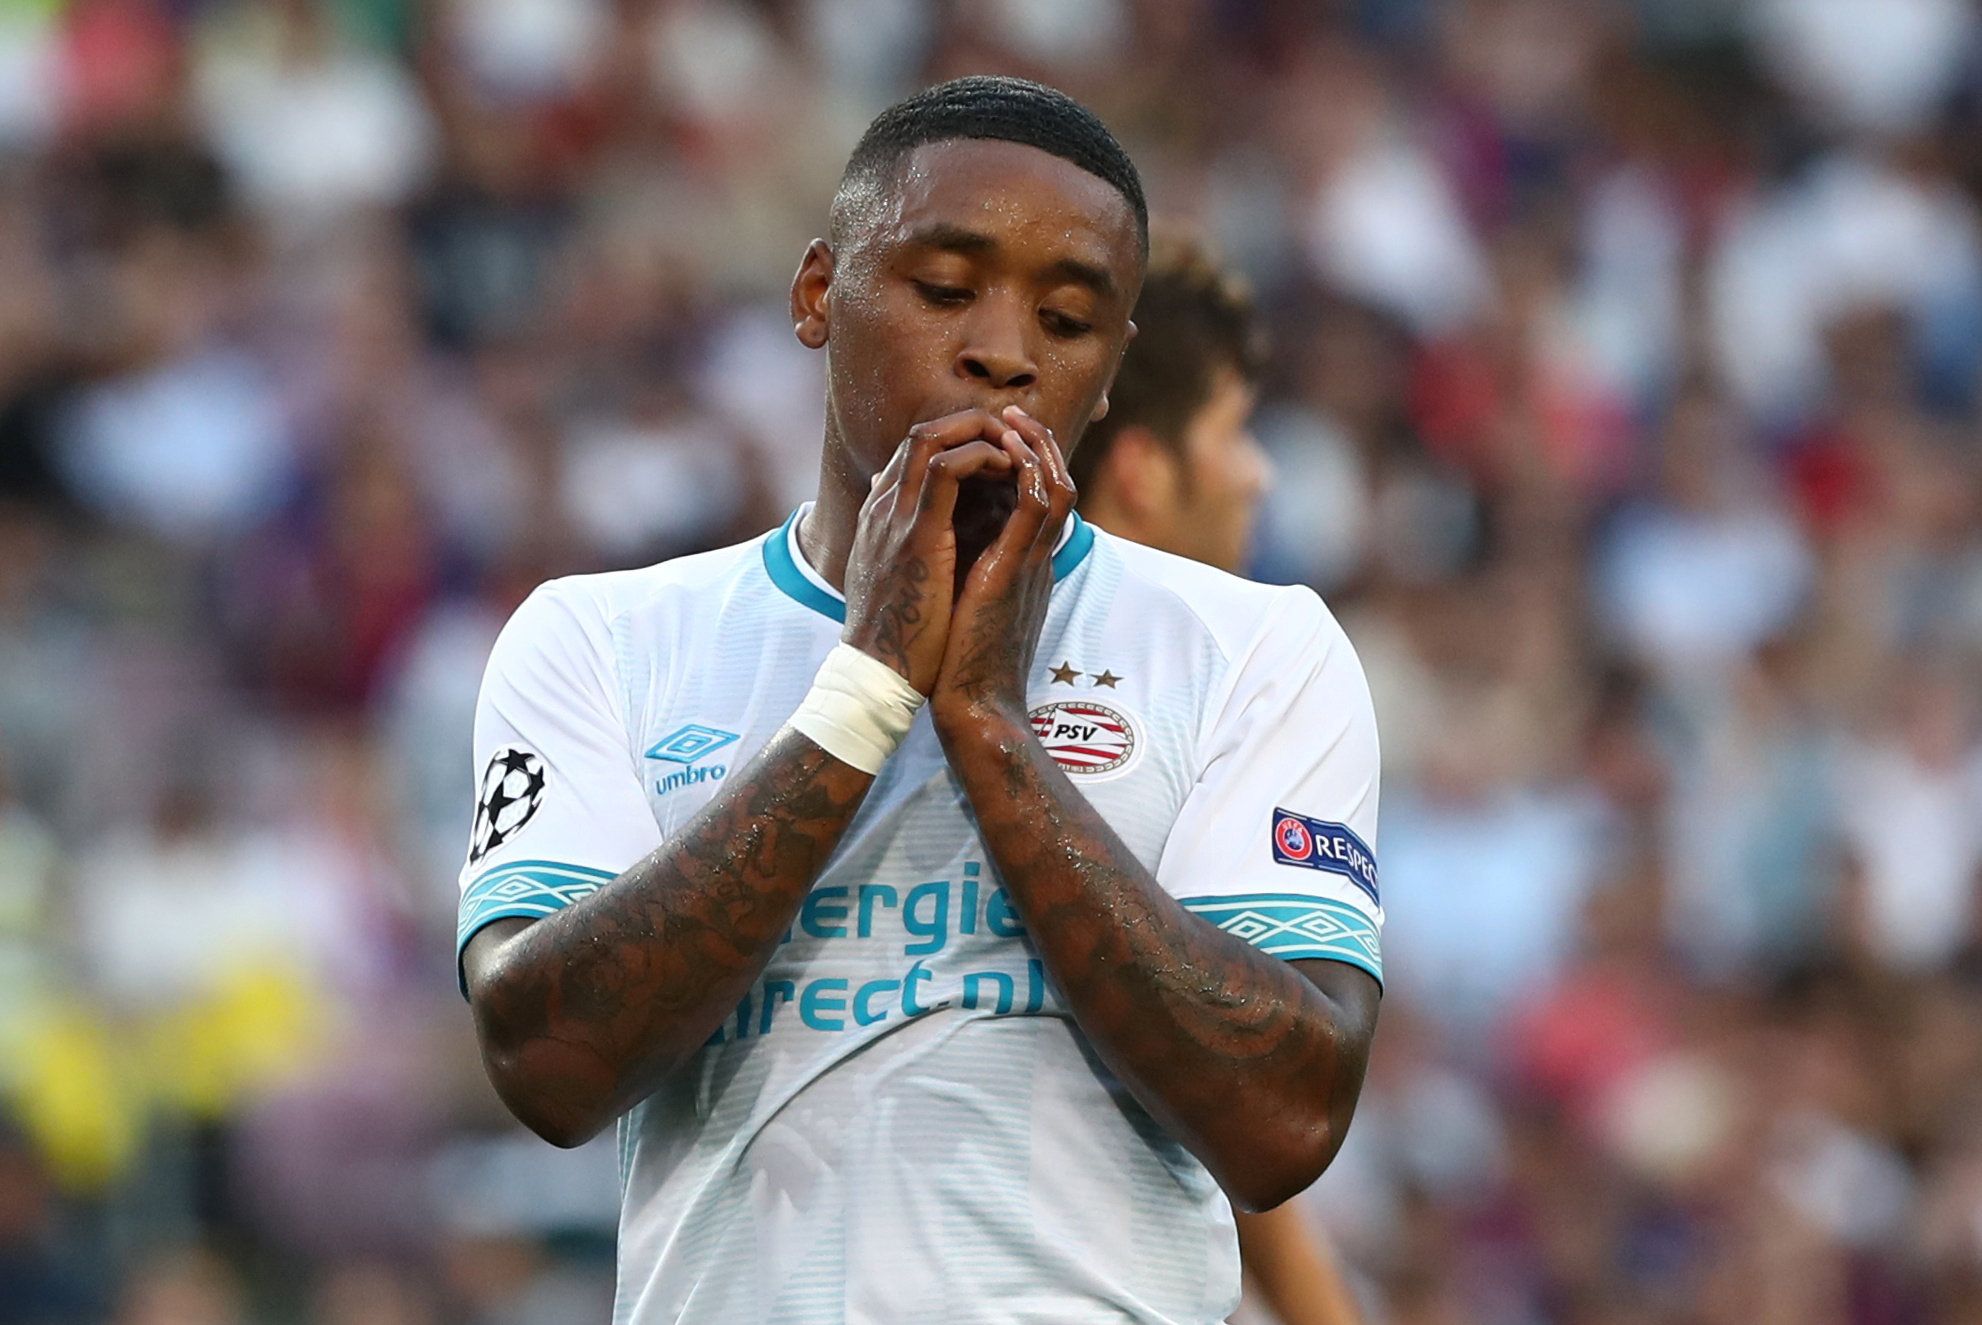 Soccer Football - Champions League - Group Stage - Group B - FC Barcelona v PSV Eindhoven - Camp Nou, Barcelona, Spain - September 18, 2018  PSV Eindhoven's Steven Bergwijn looks dejected   REUTERS/Sergio Perez